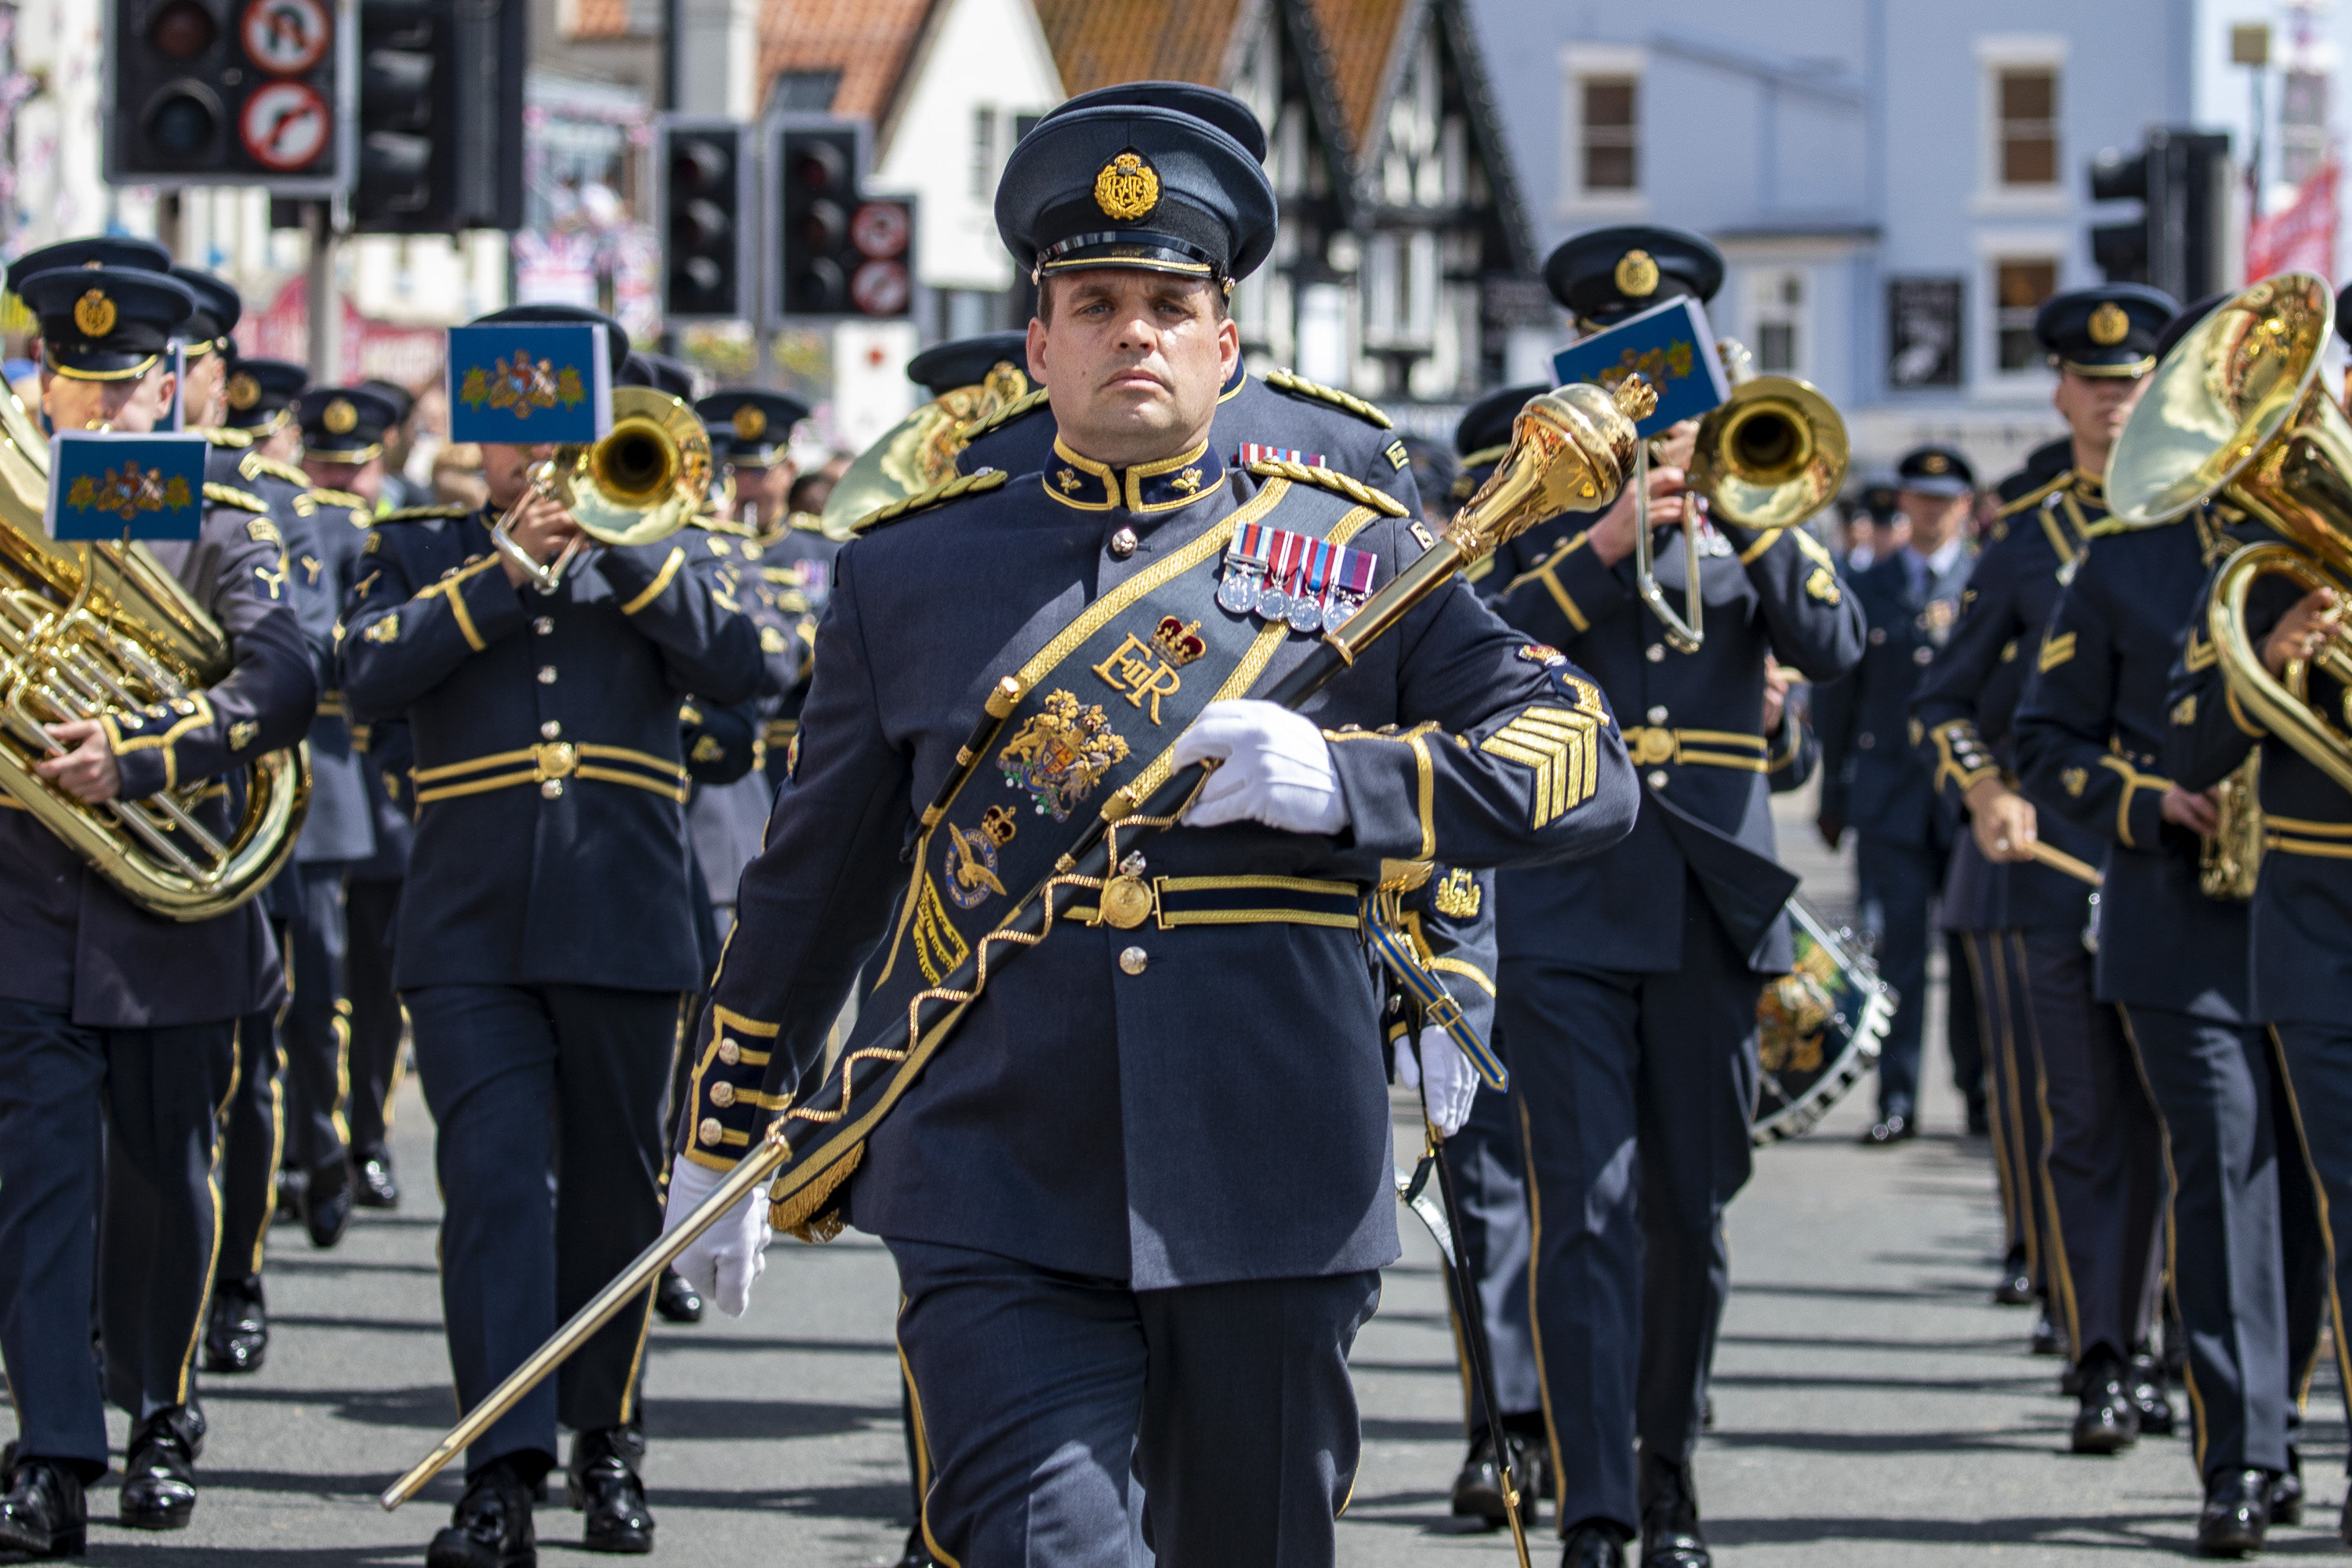 Band of the RAF in parade.